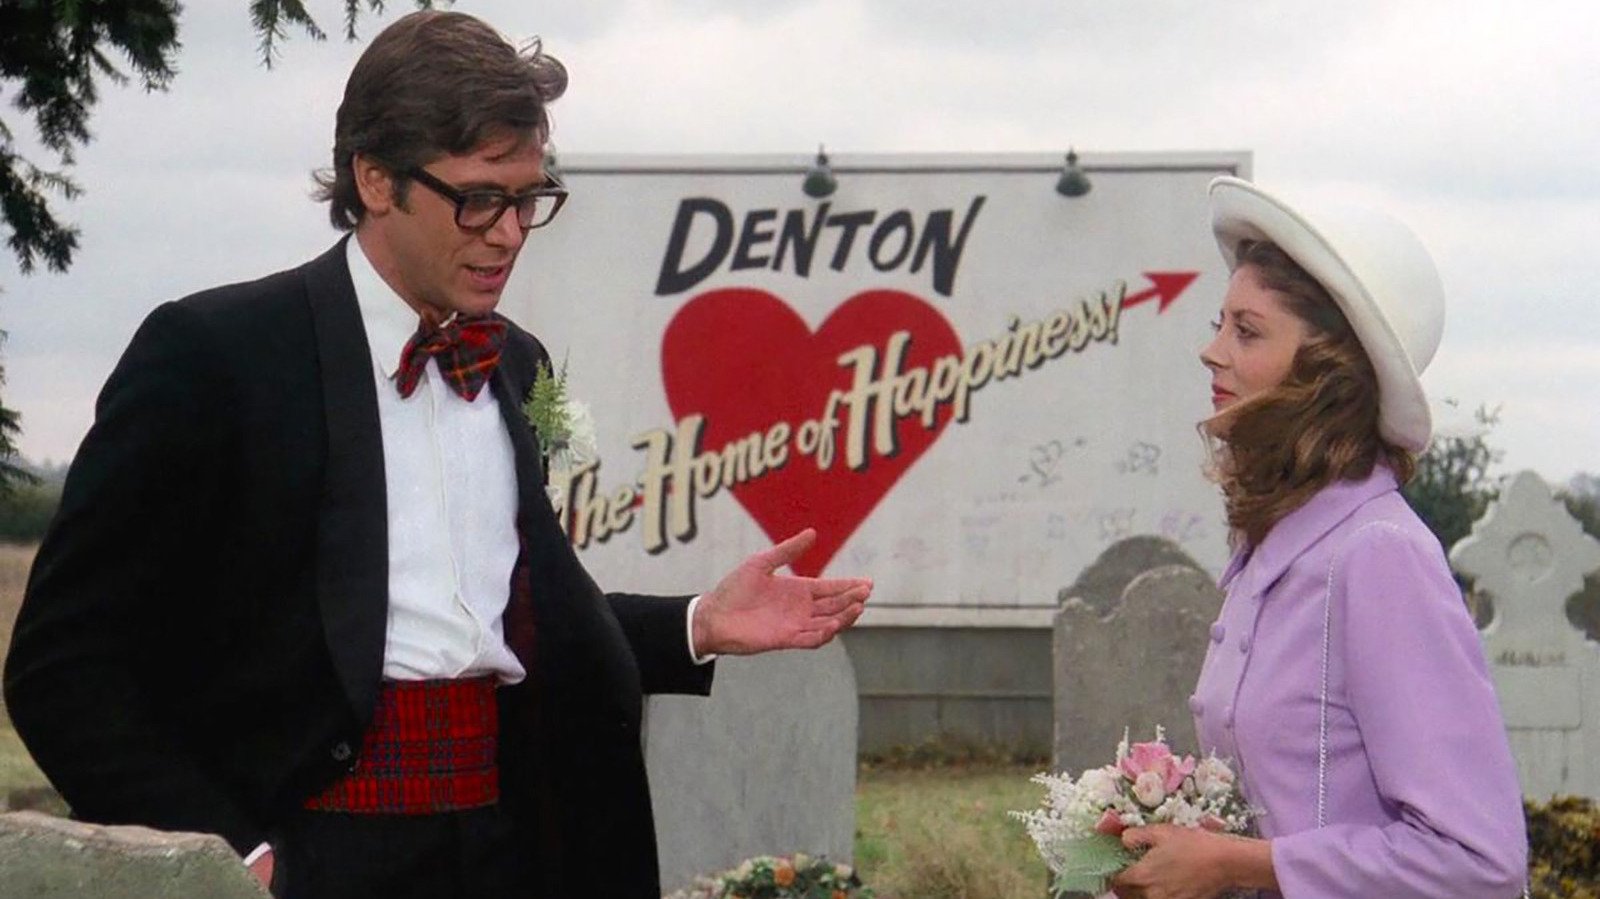 The Rocky Horror Picture Show Opening That Was Rejected By The Studio - /Film